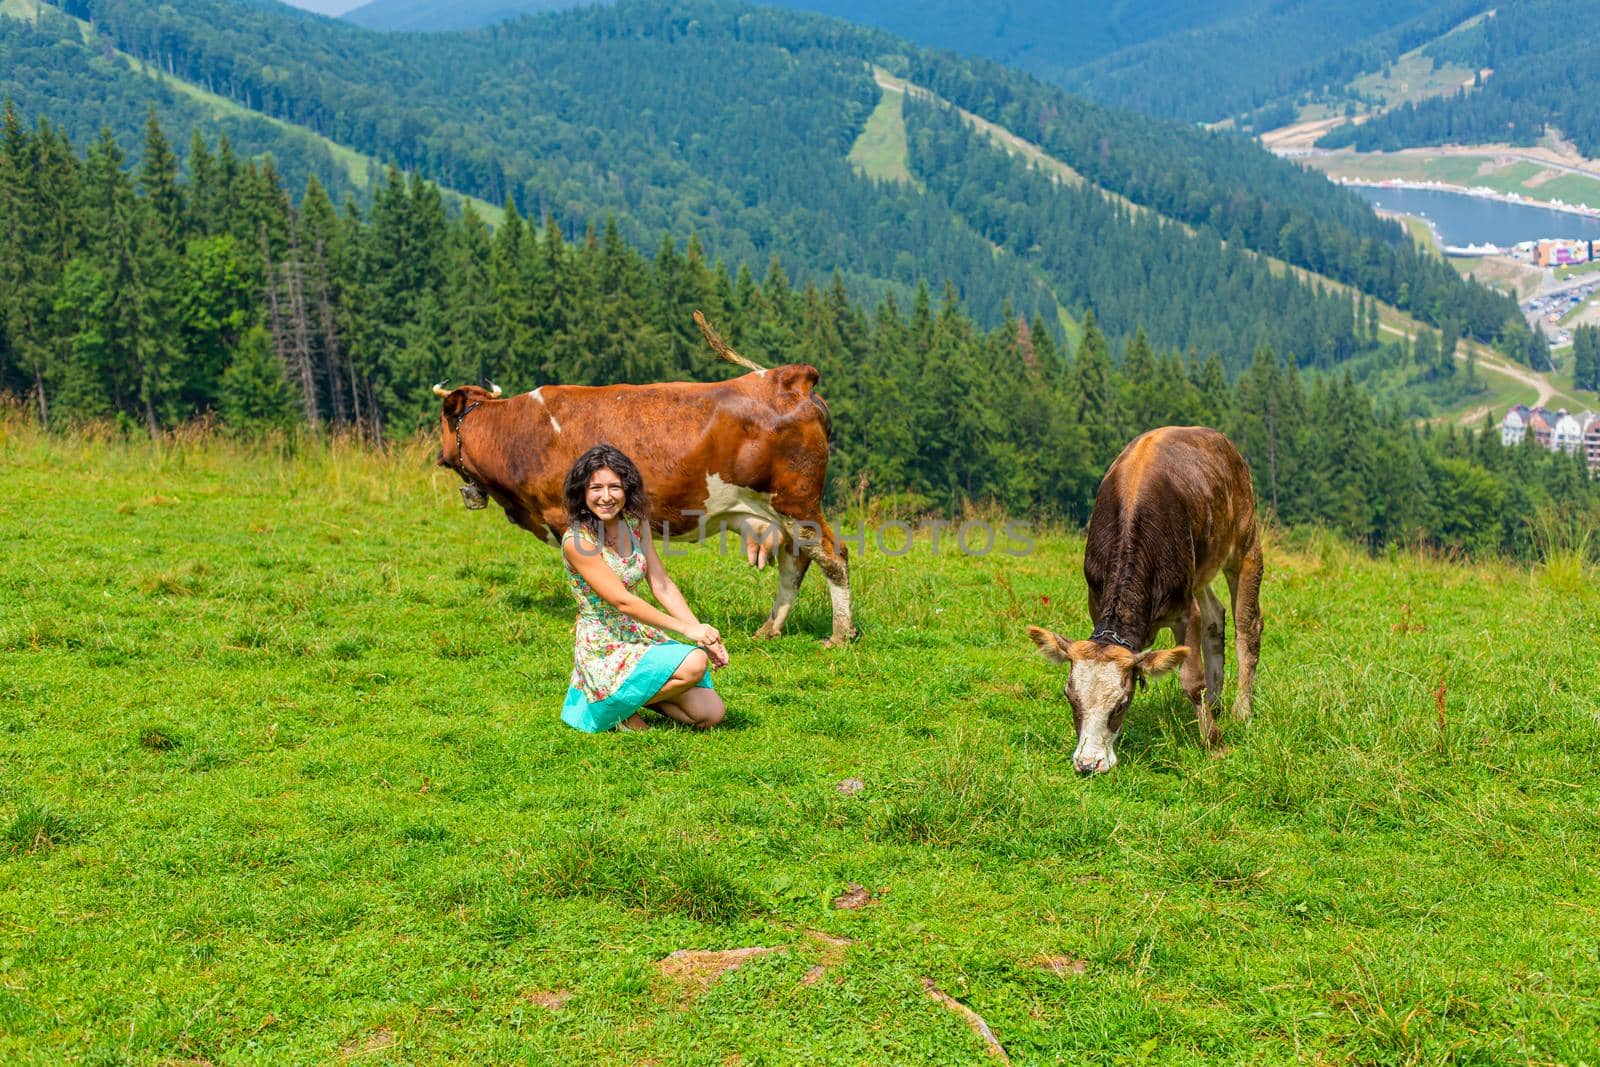 A young gorgeous girl shepherd grazing cows in a mountain meadow with amazing views of the hills.